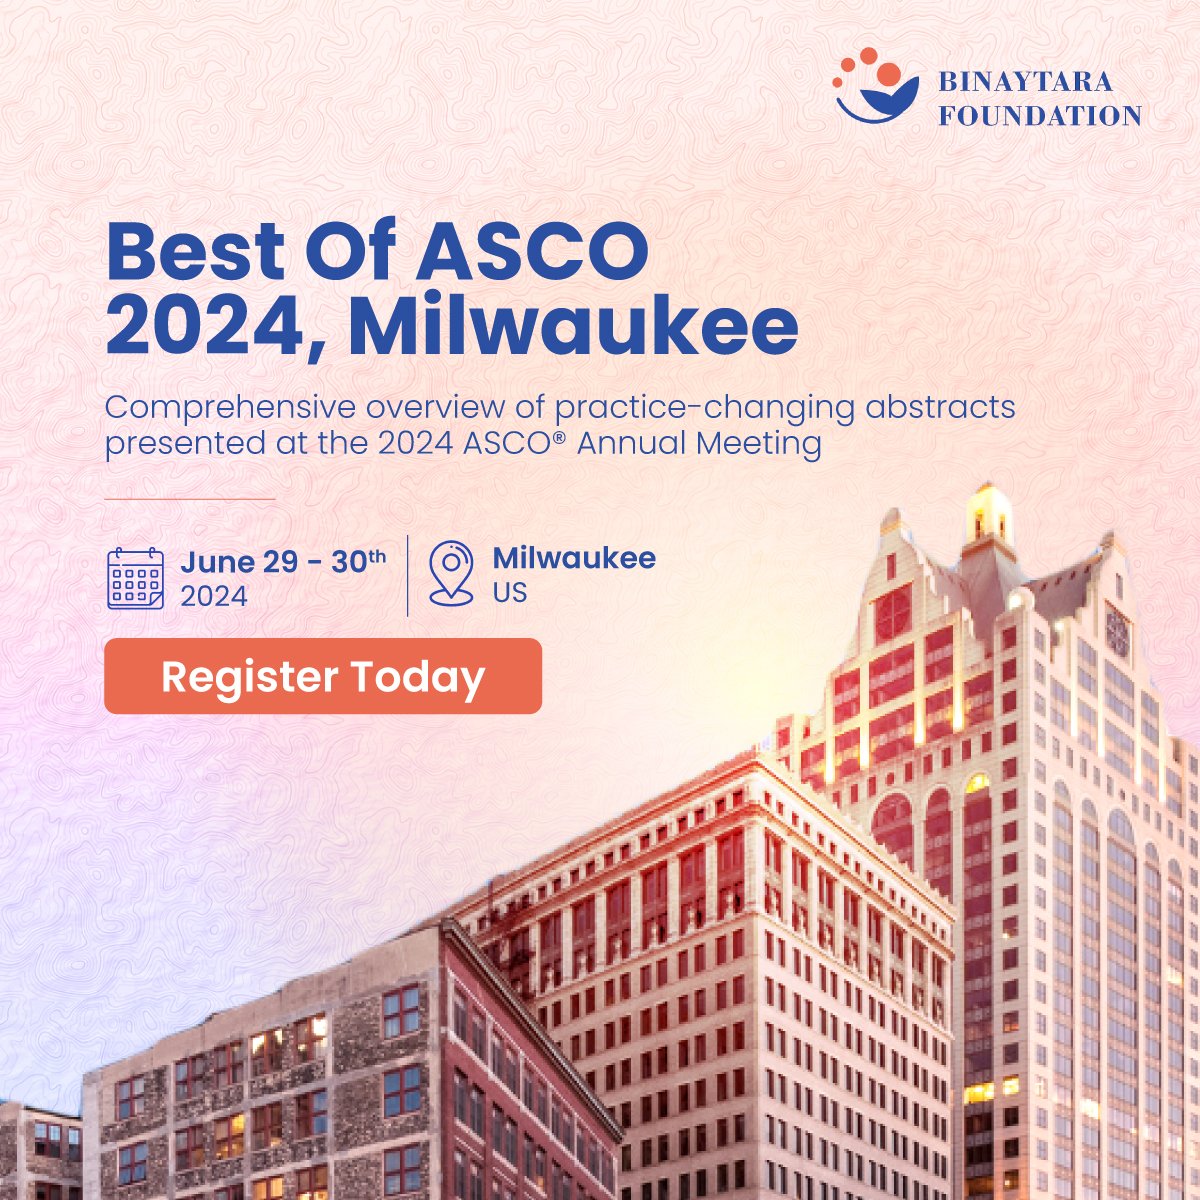 Join us at Best of ASCO 2024 in Milwaukee, June 29-30! Get the latest oncology updates and practice-changing insights directly from #ASCO24 🌐 Register today education.binayfoundation.org/content/best-a… Best of ASCO 2024, Milwaukee | June 29-30 📅 This meeting features a comprehensive overview of…